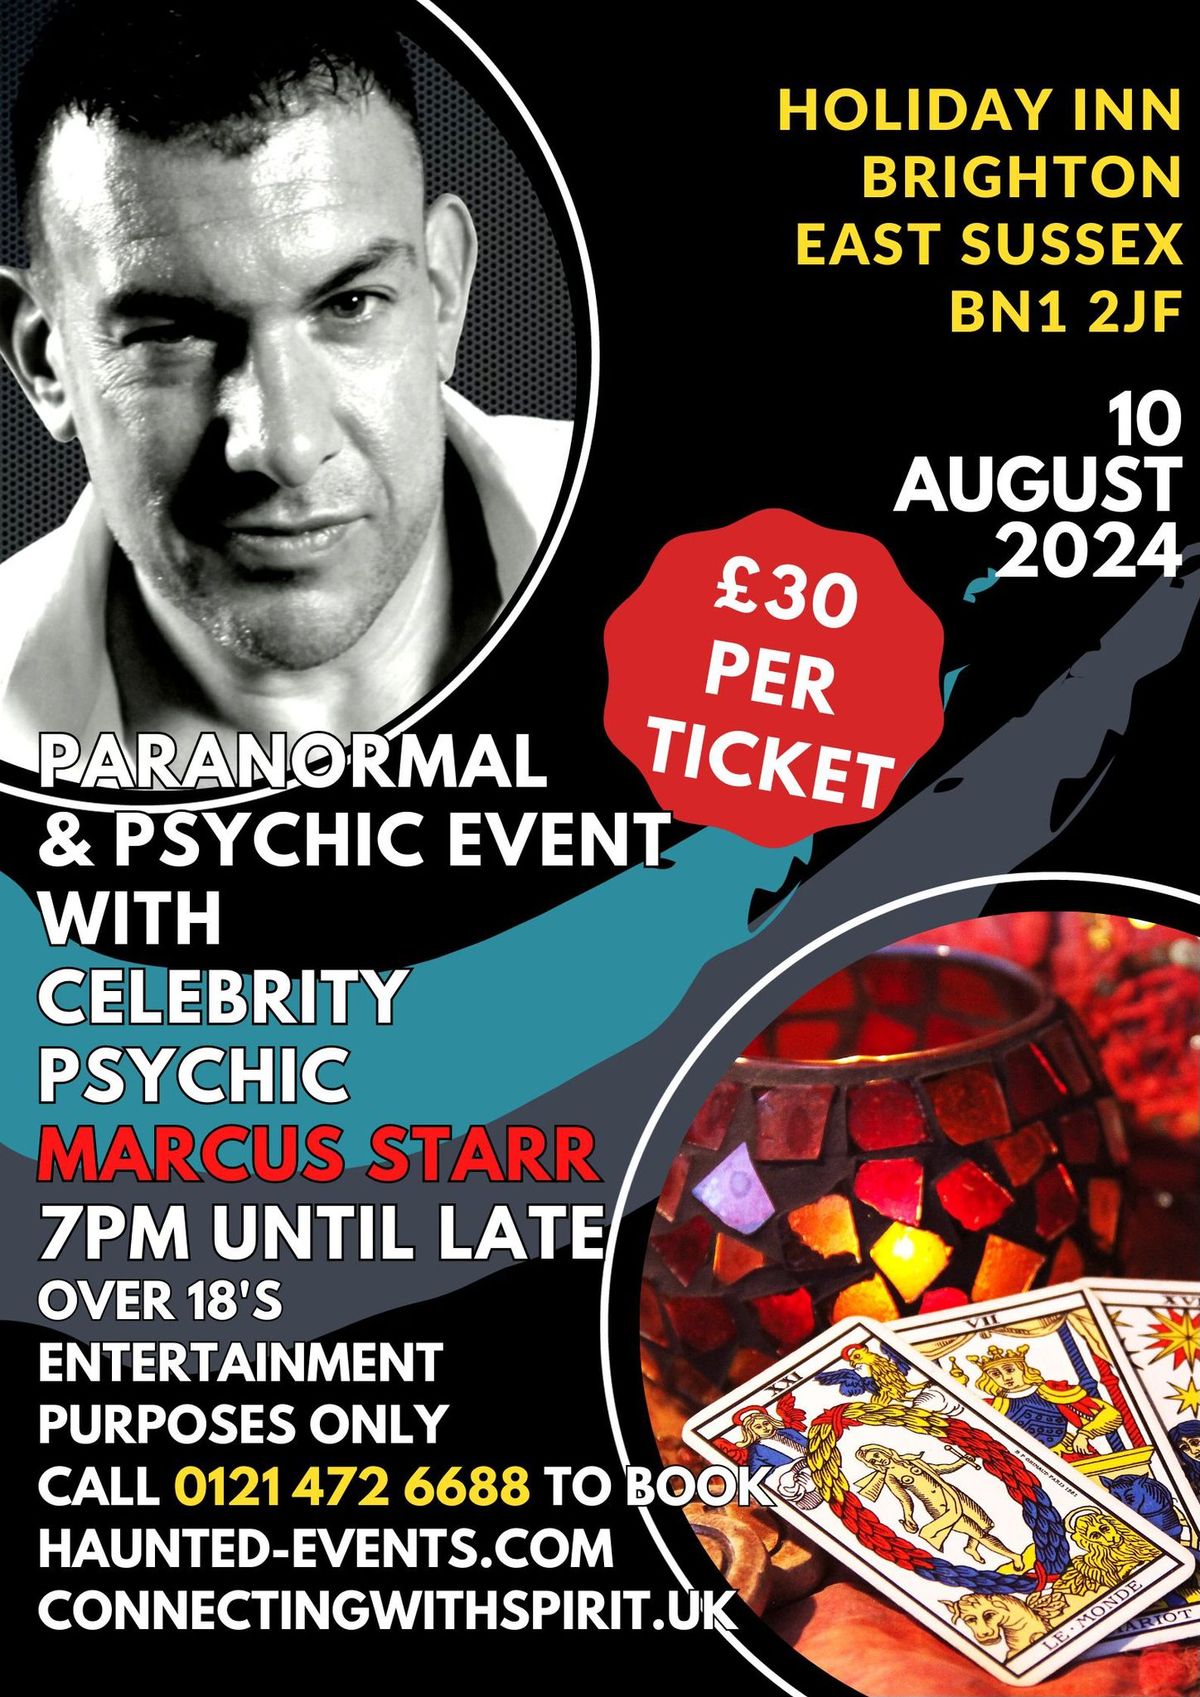 Paranormal & Psychic Event with Celebrity Psychic Marcus Starr @ IHG Brighton - Seafront